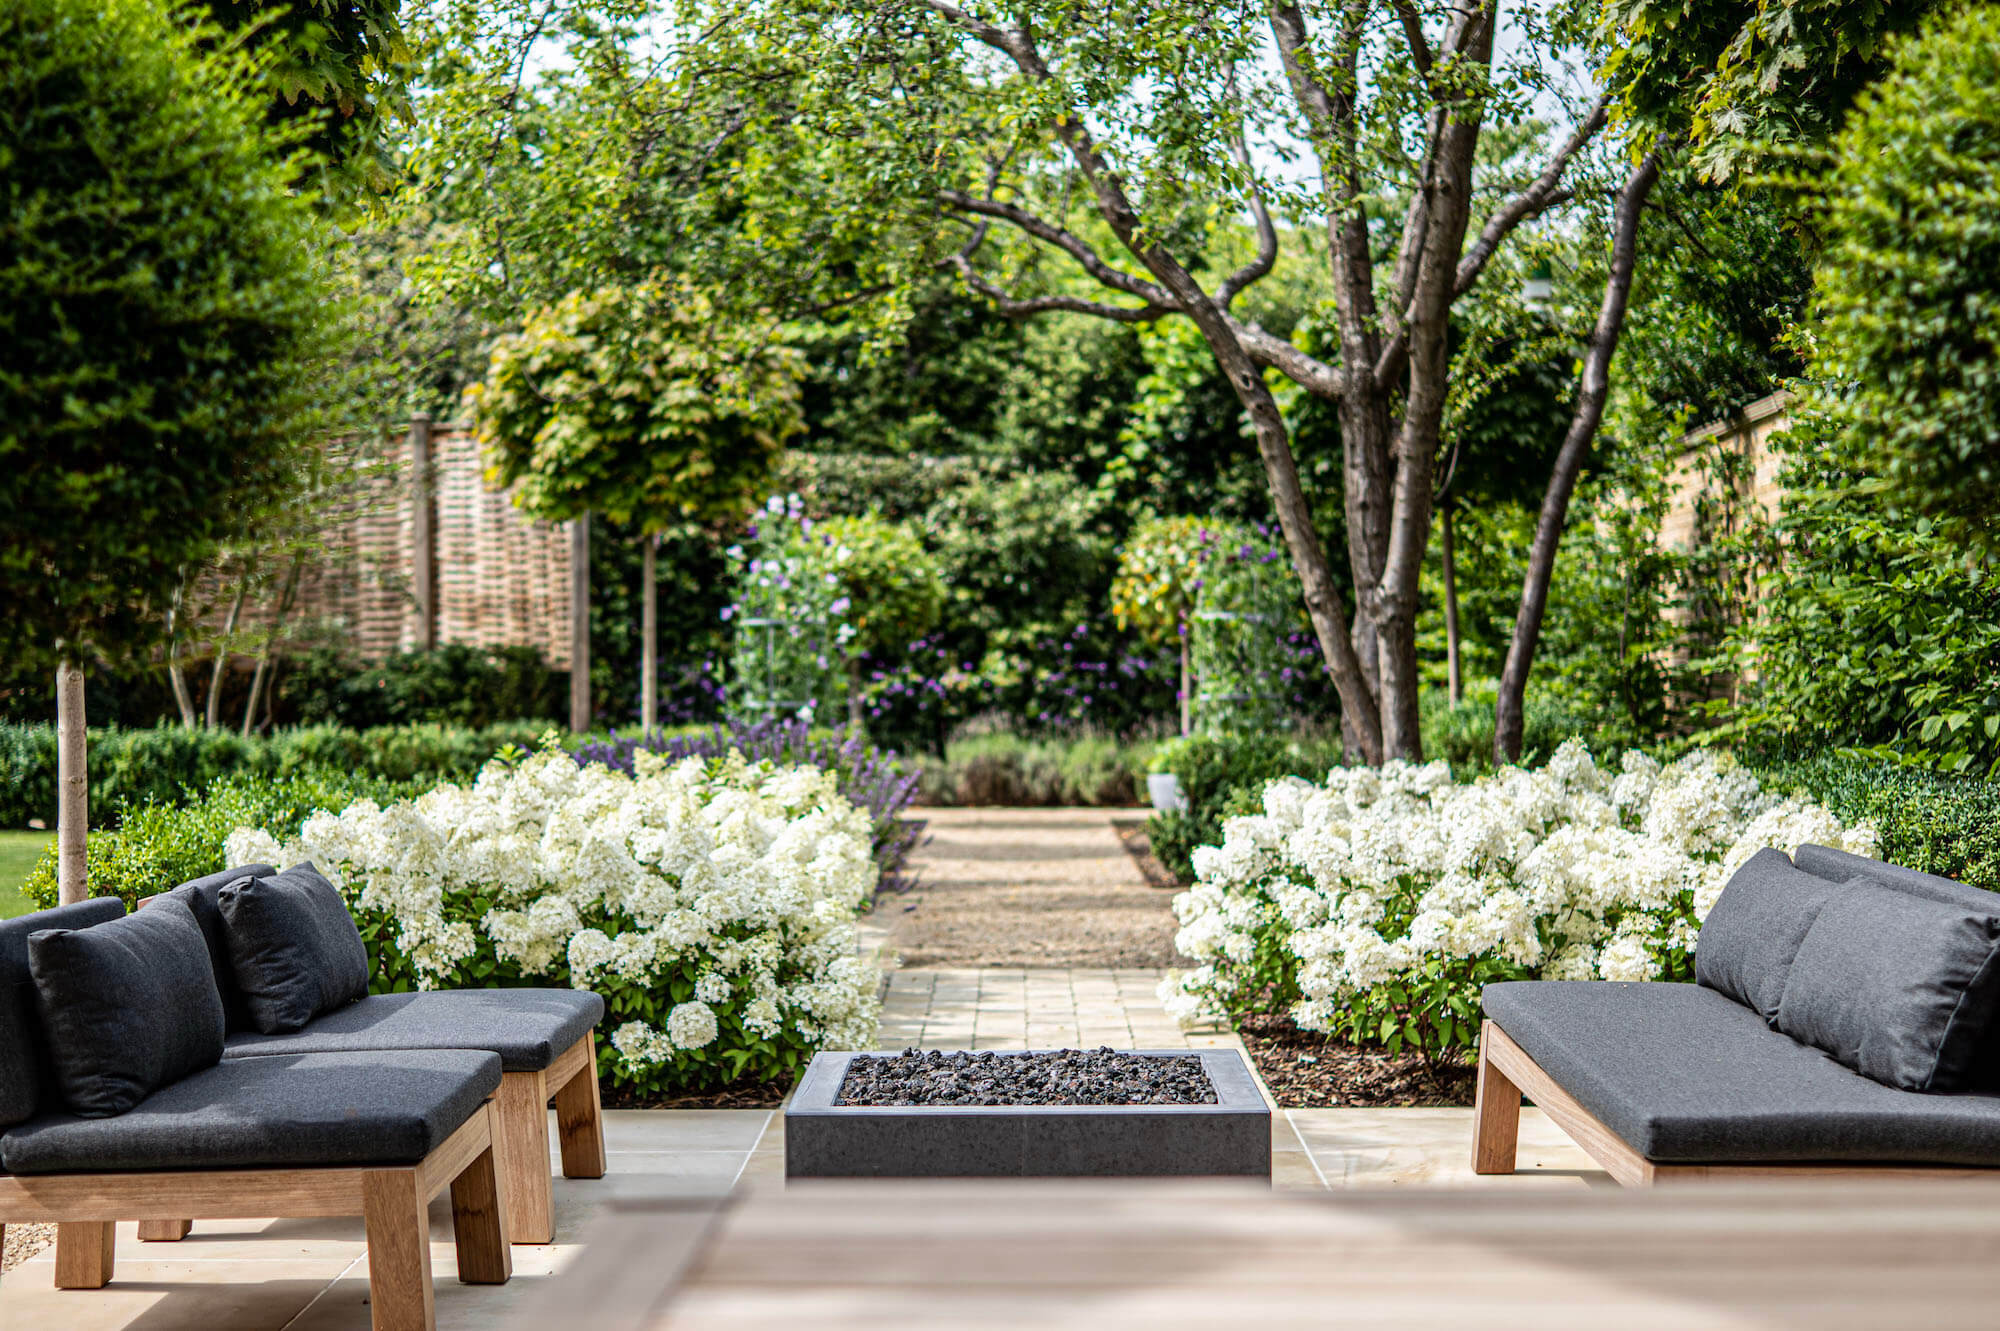 piet boon garden furniture in a townhouse garden in Oxford, with white Bobo Hydrangeas lining a path behind. The background is a faded productive garden with Sweet peas on metal obelisks